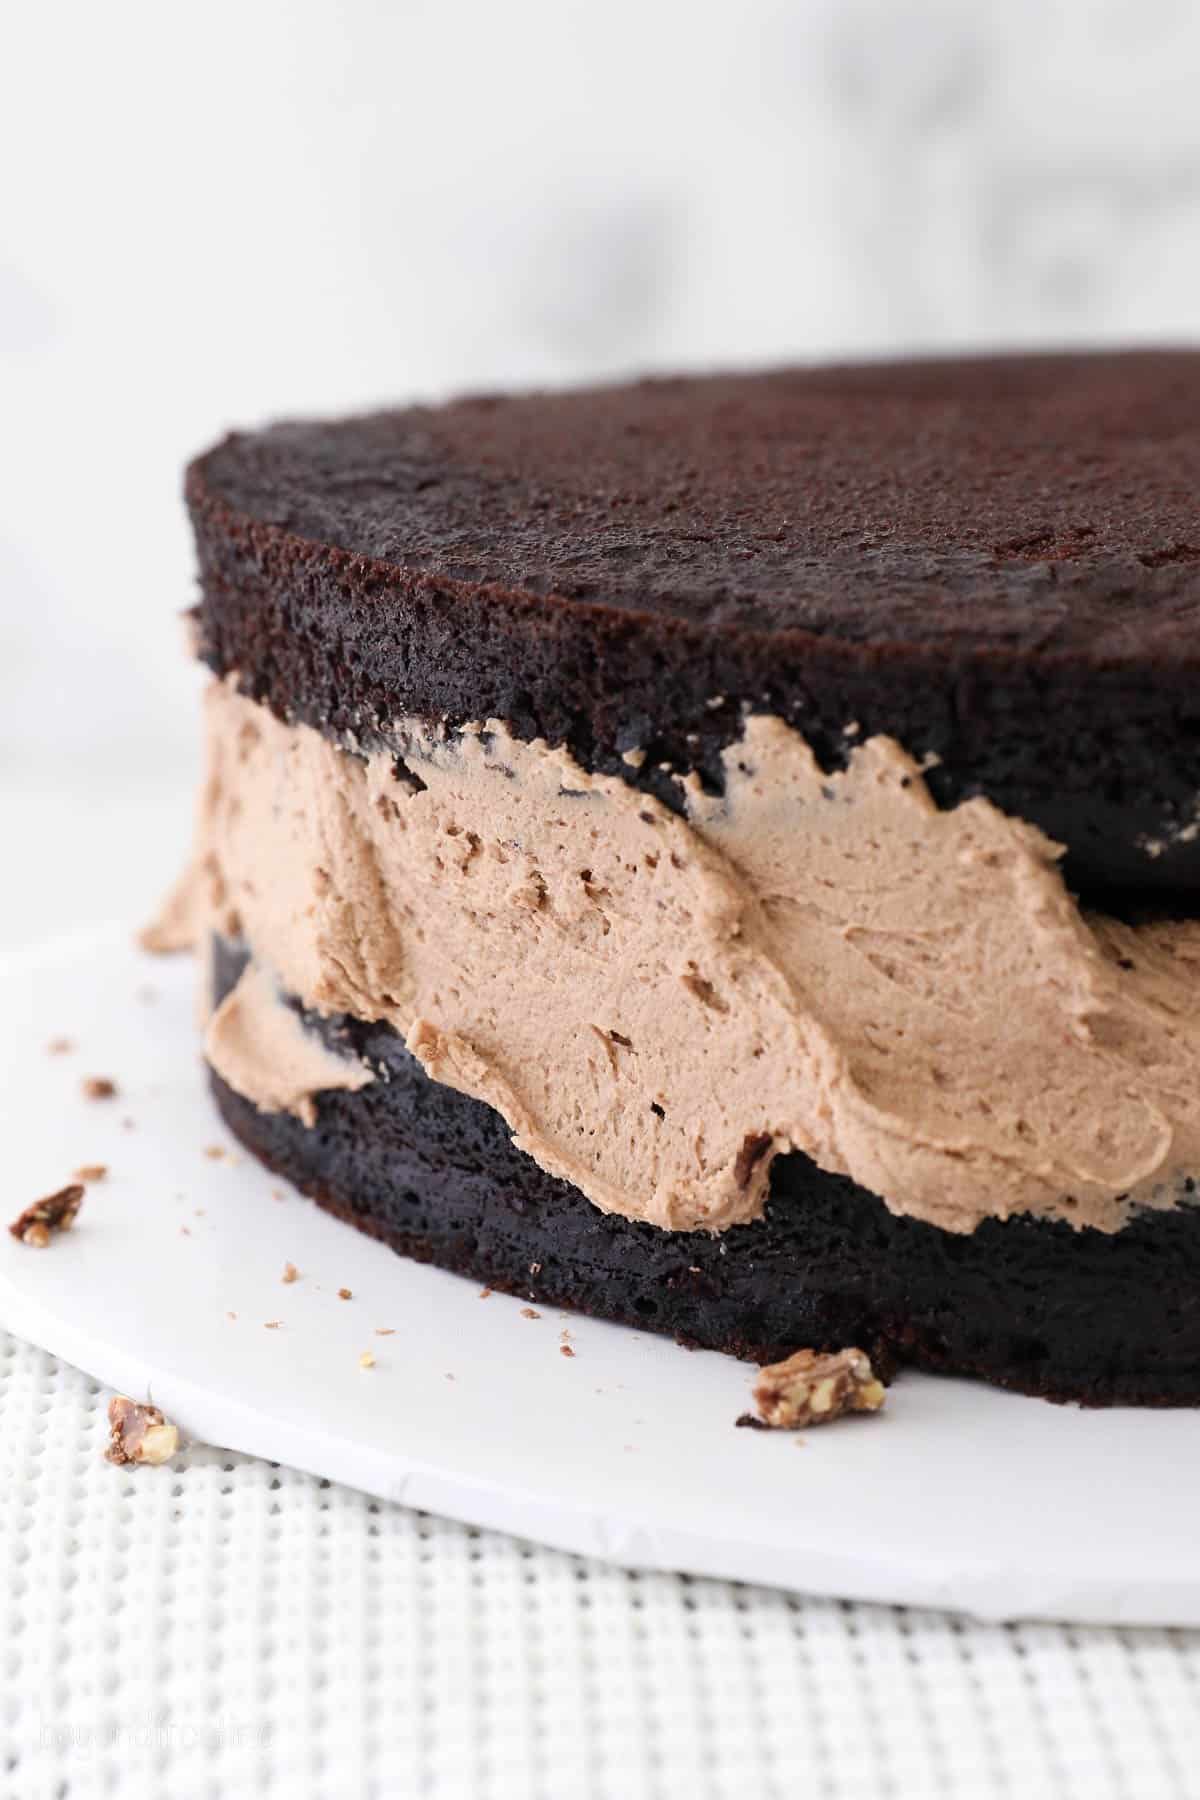 Layers of chocolate cake with Nutella frosting on sides.